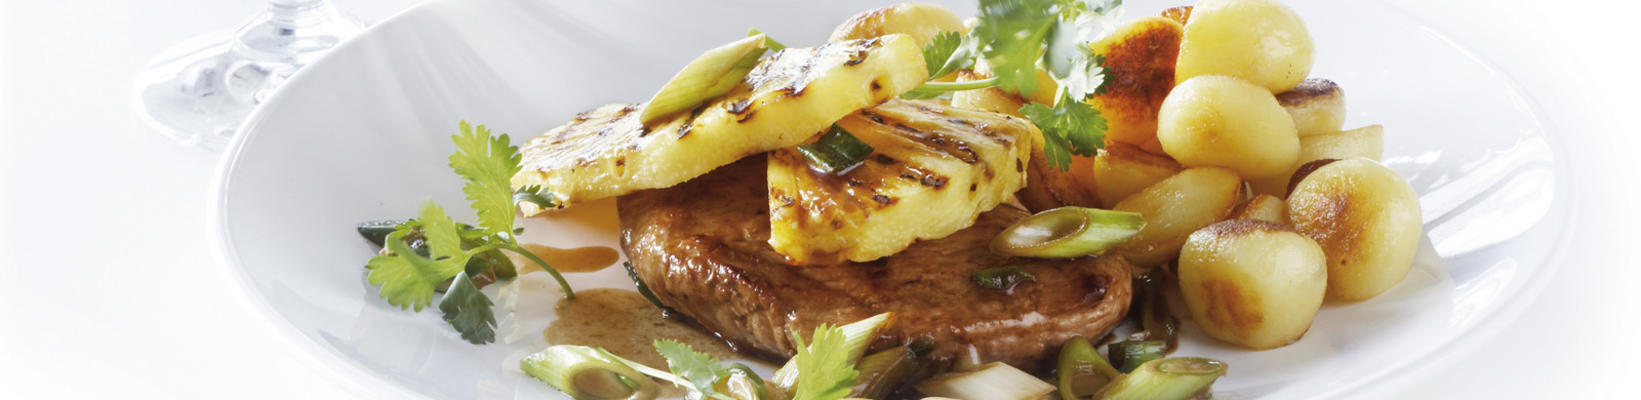 pork fillets with pineapple